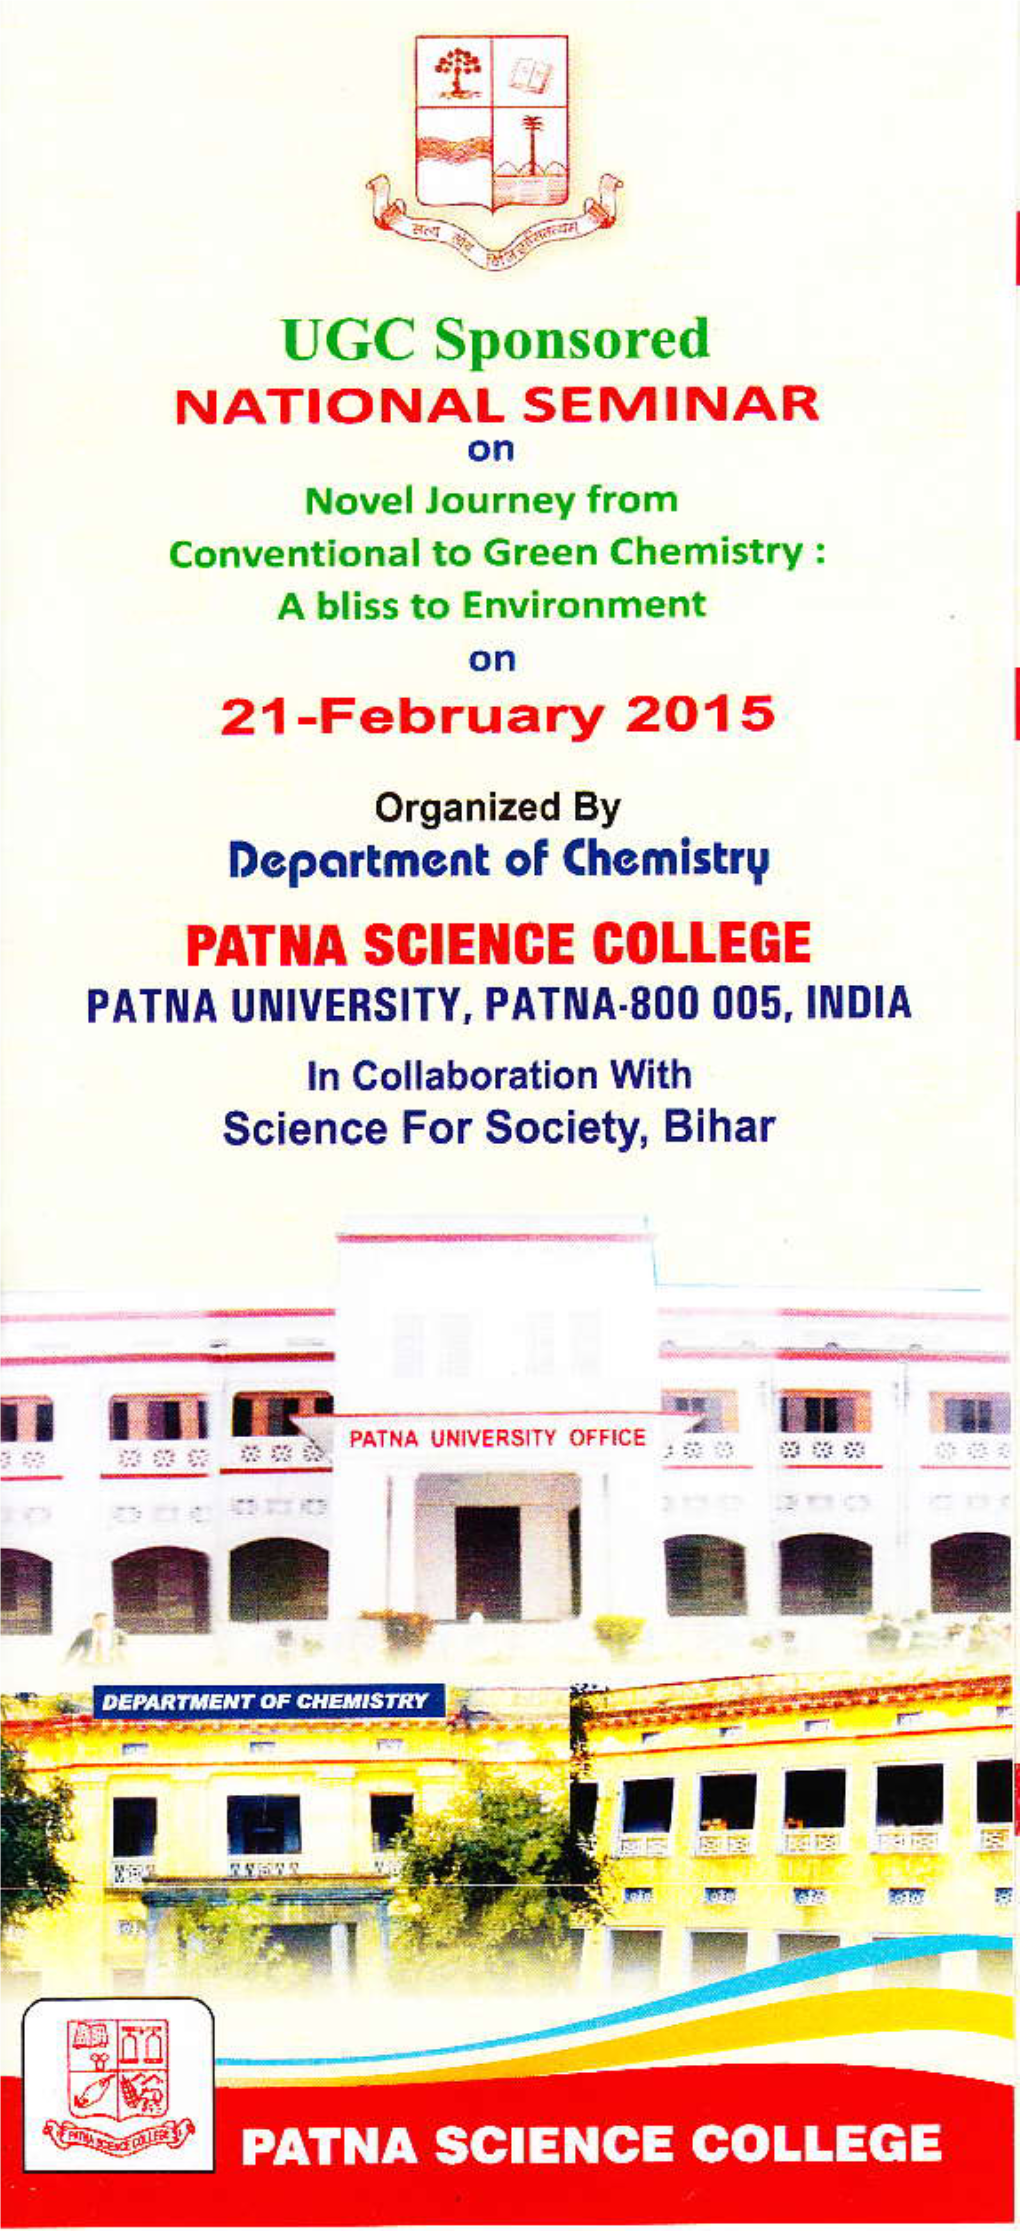 GC Sponsored NATIONAL SEMINAR on Novel Journey from Conventional to Green Chemistry : a Bliss to Environment on 21-February 2O15